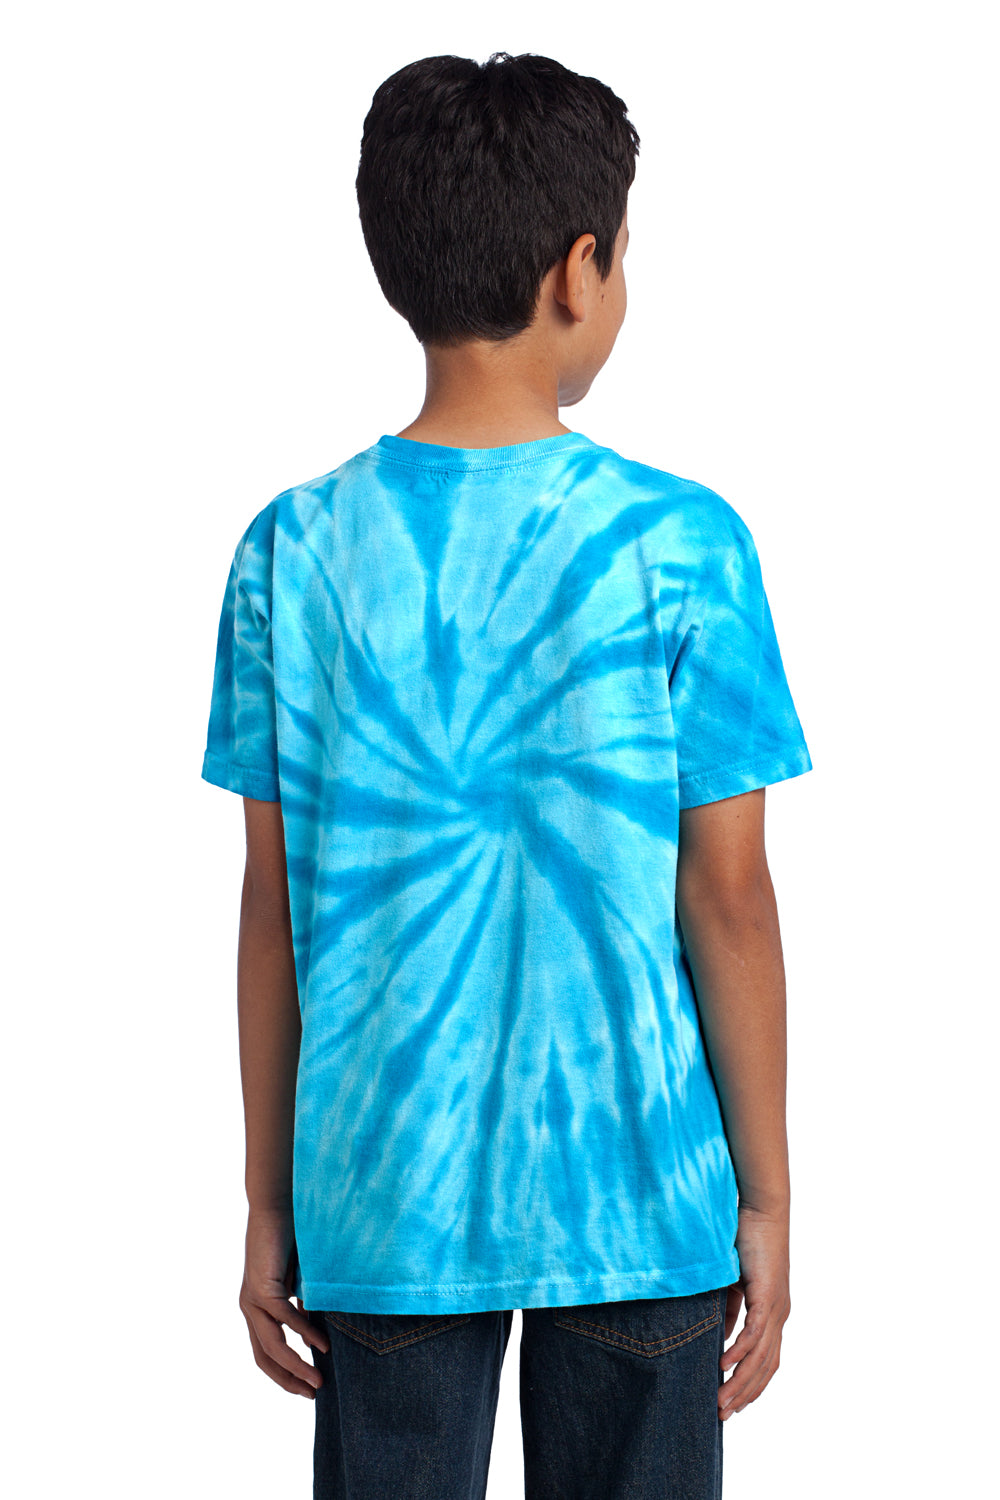 Port & Company PC147Y Youth Tie-Dye Short Sleeve Crewneck T-Shirt Turquoise Blue Back